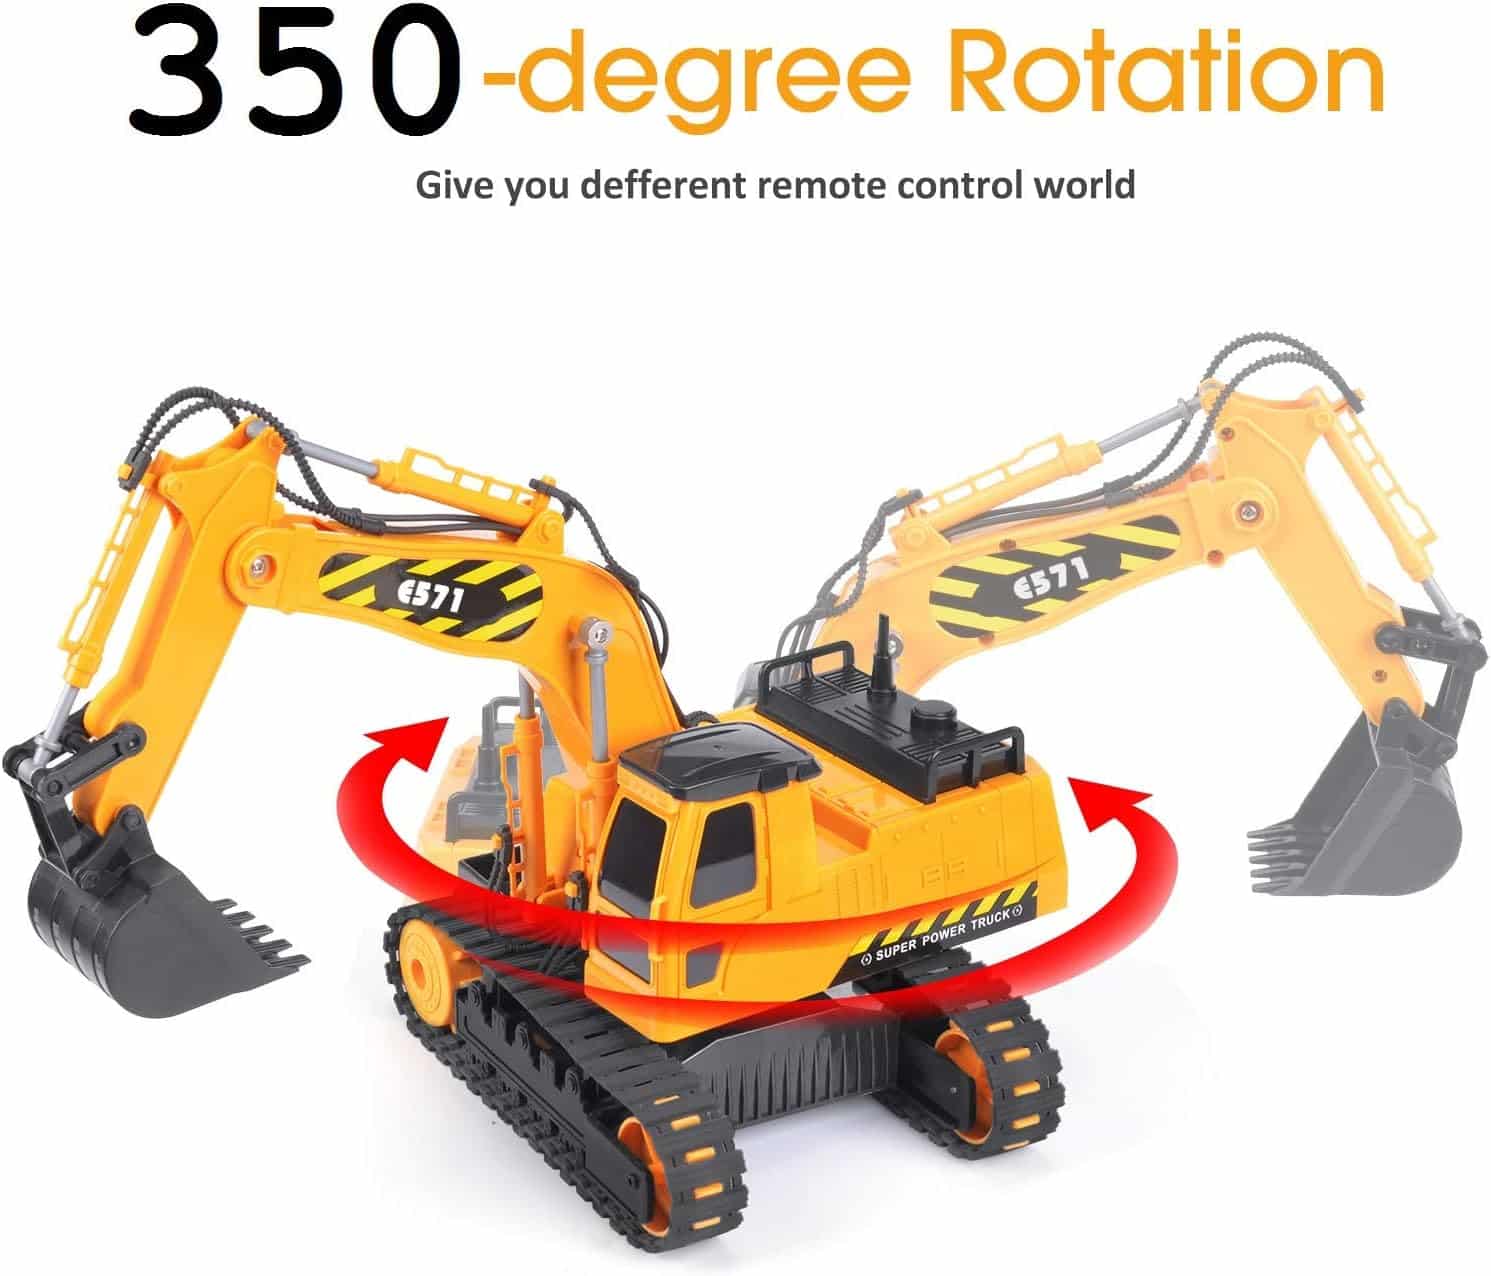 DOUBLE E Remote Control Excavator Toy: A Fun and Educational Construction Experience